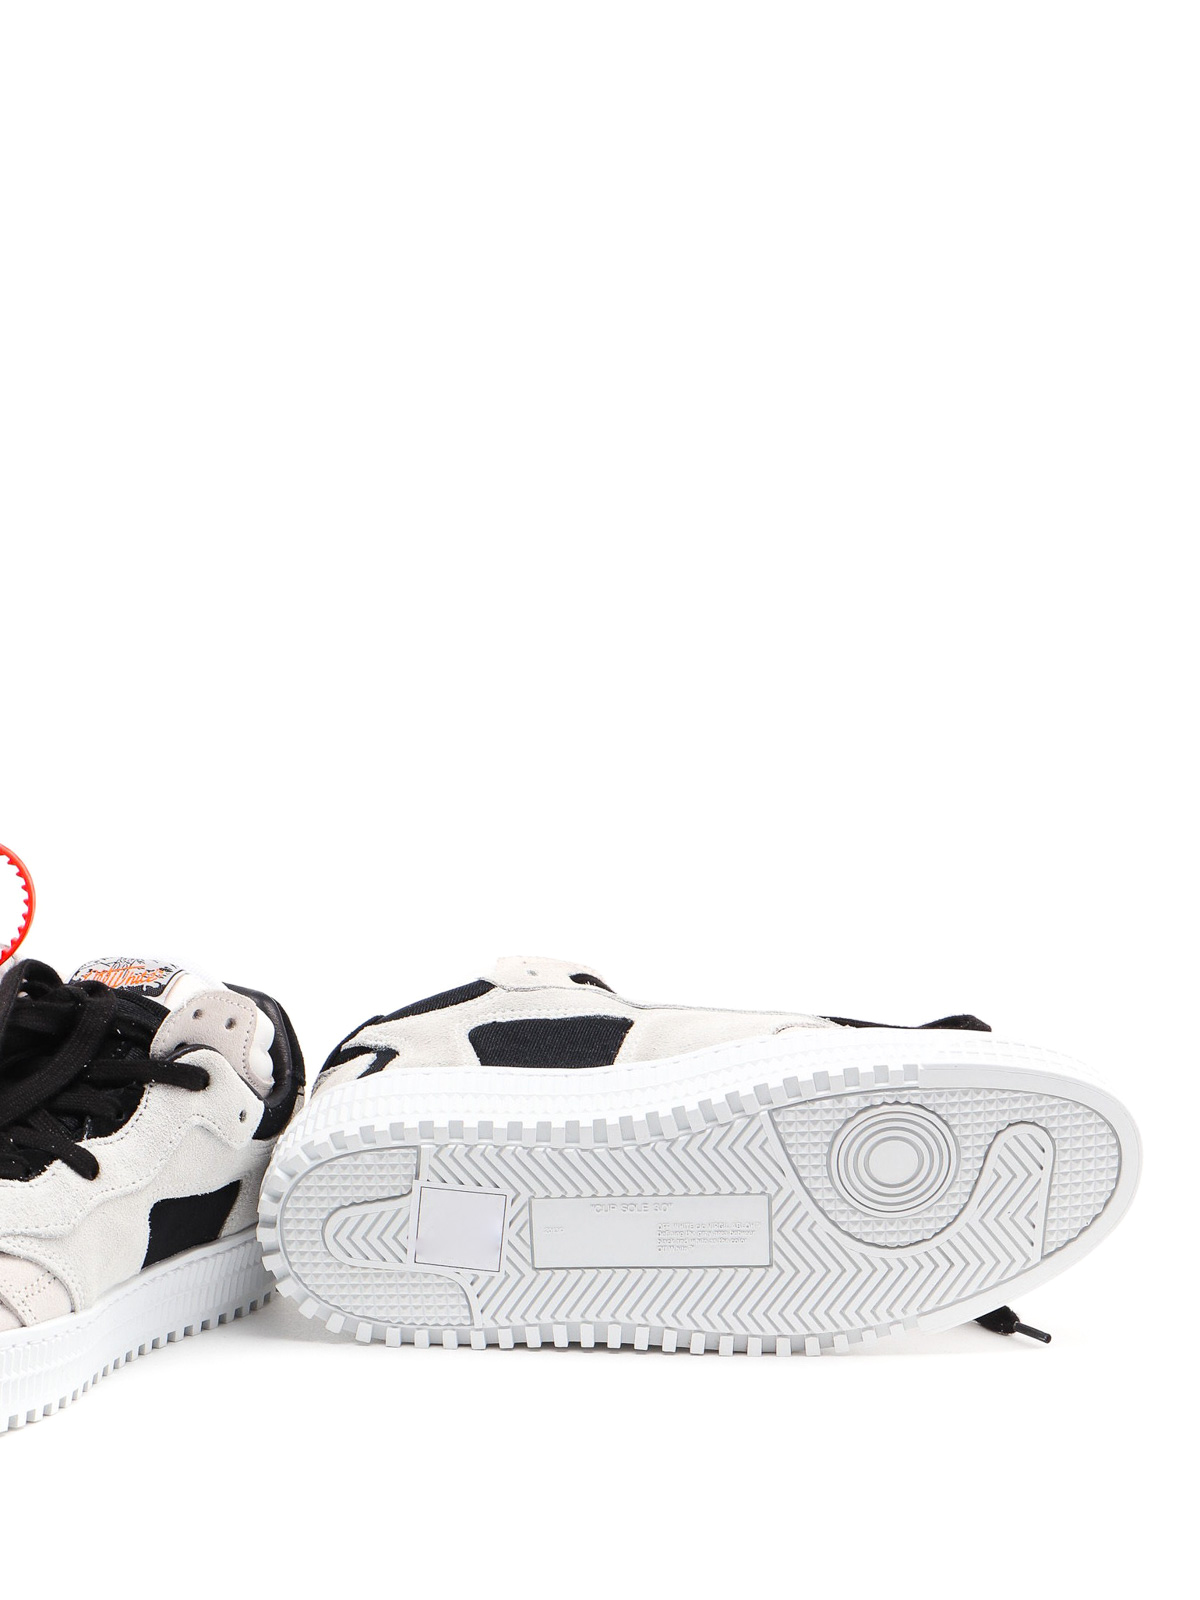 Trainers Off-White - 4.0 arrow sneakers - OWIA181F19D800770210 | iKRIX.com